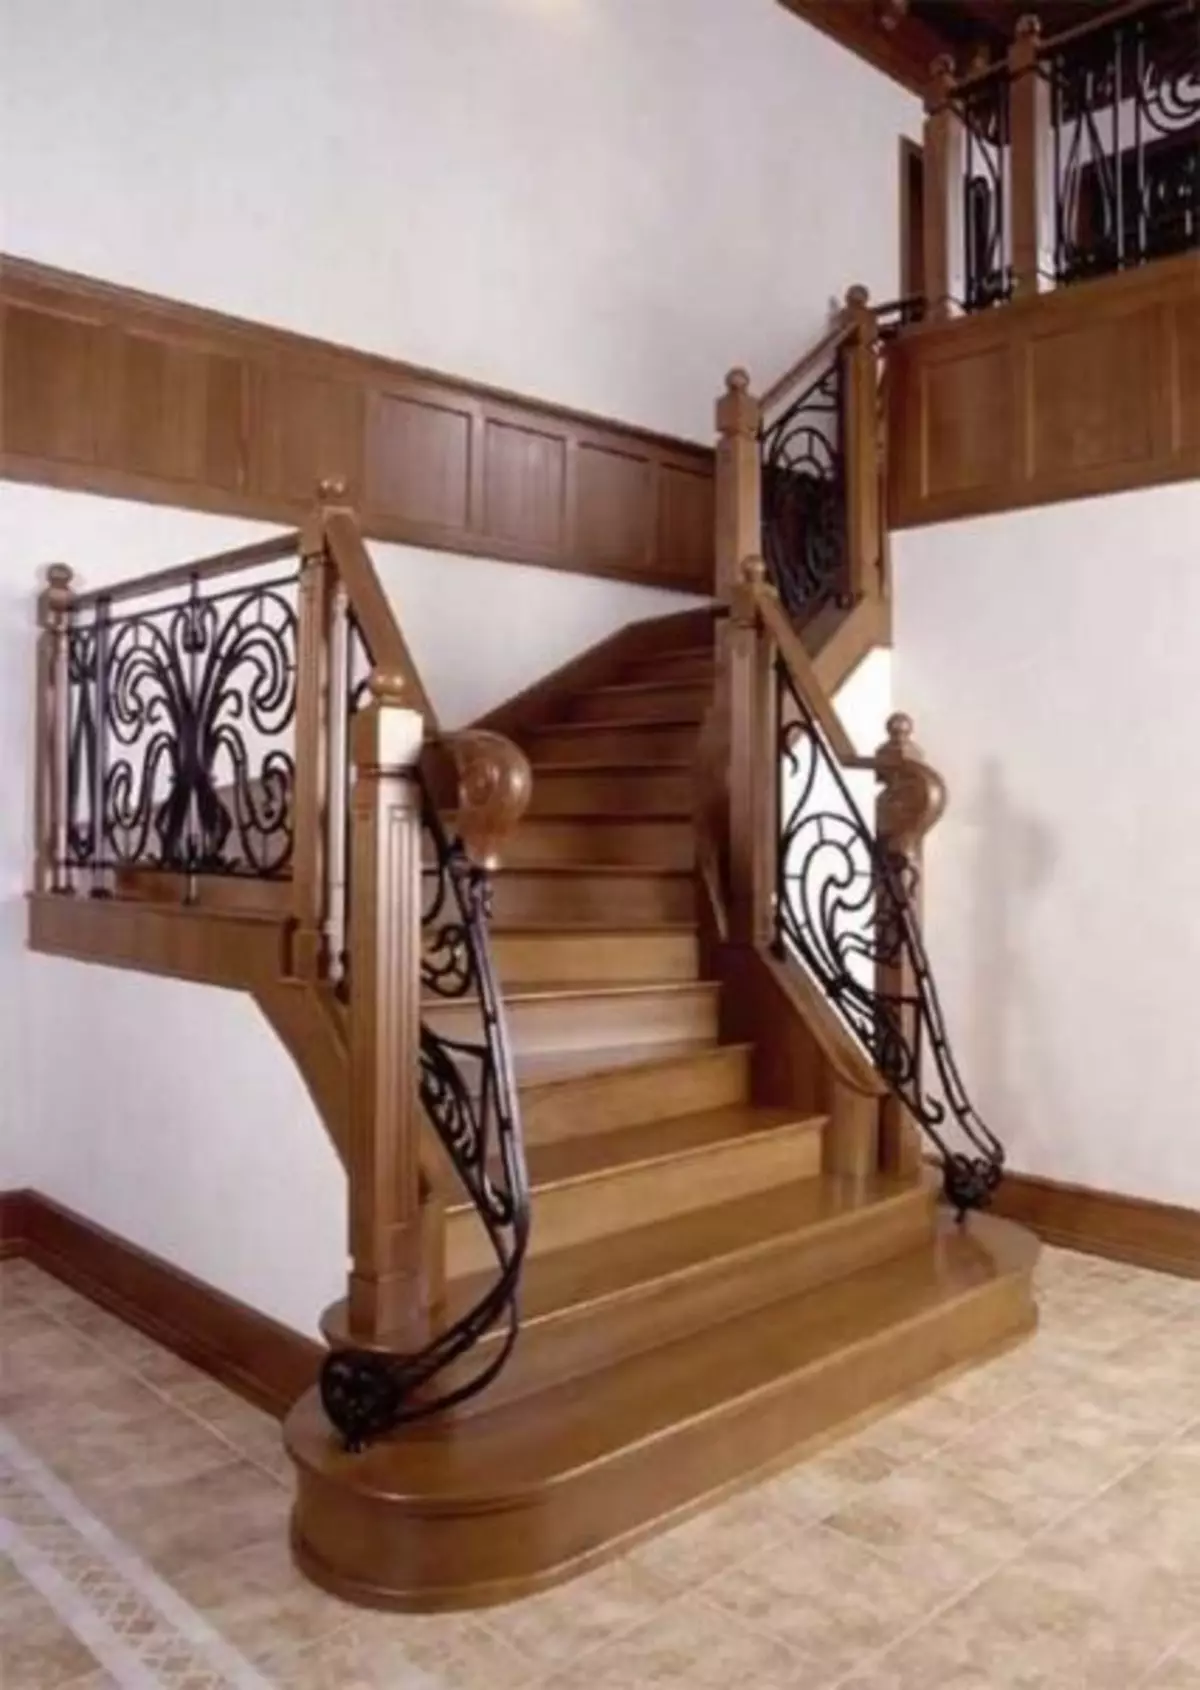 Stair railing external and internal for home and cottage